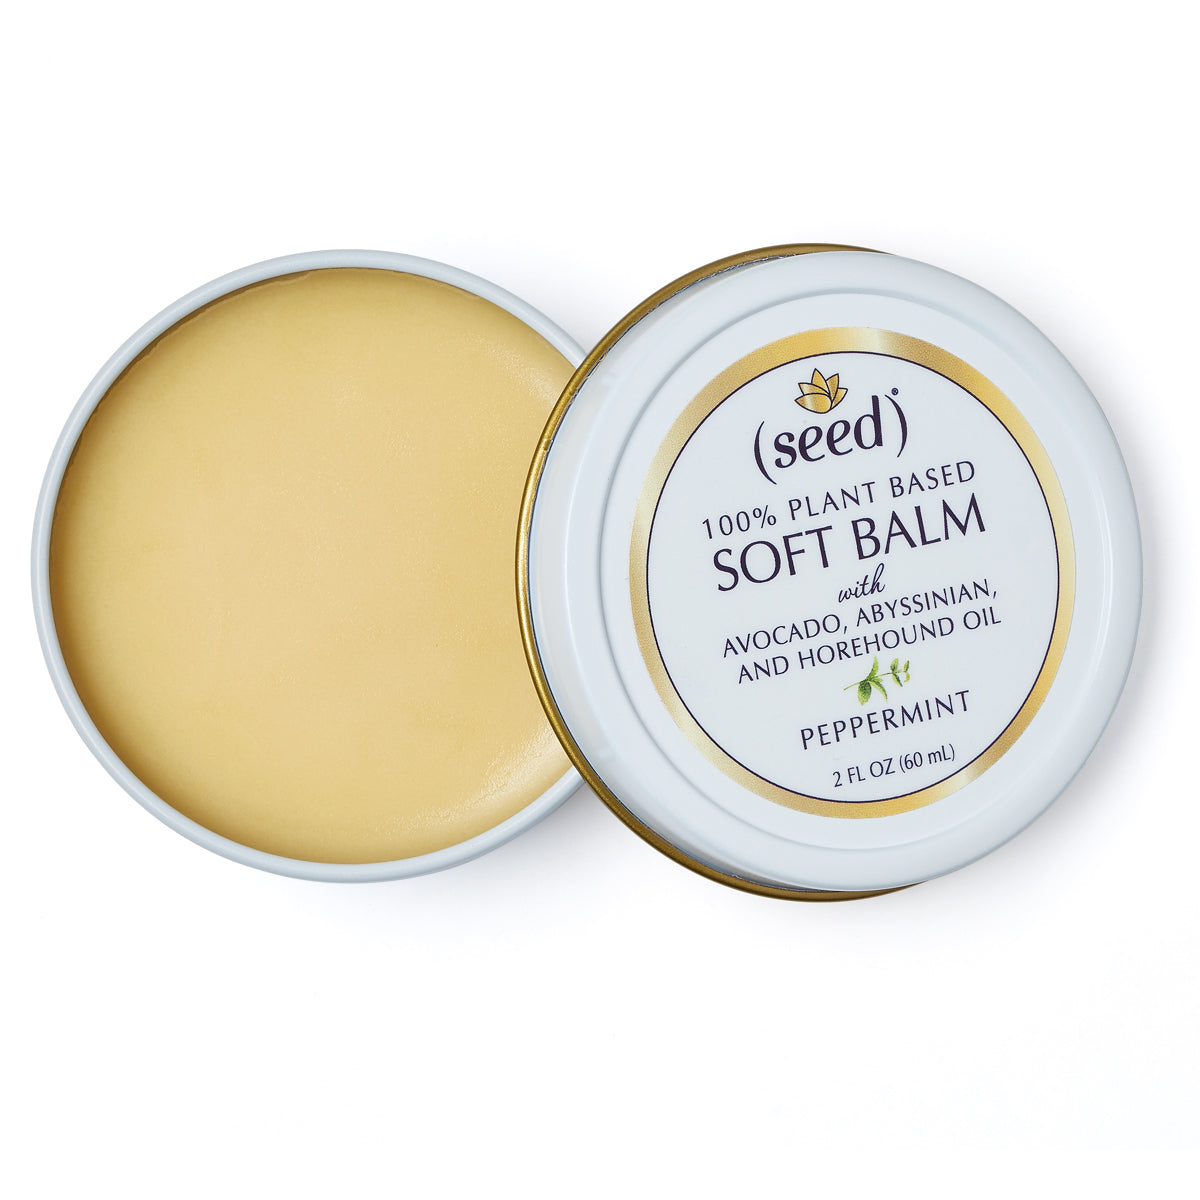 Seed Soft Balm Tin 2 oz open shown in Peppermint